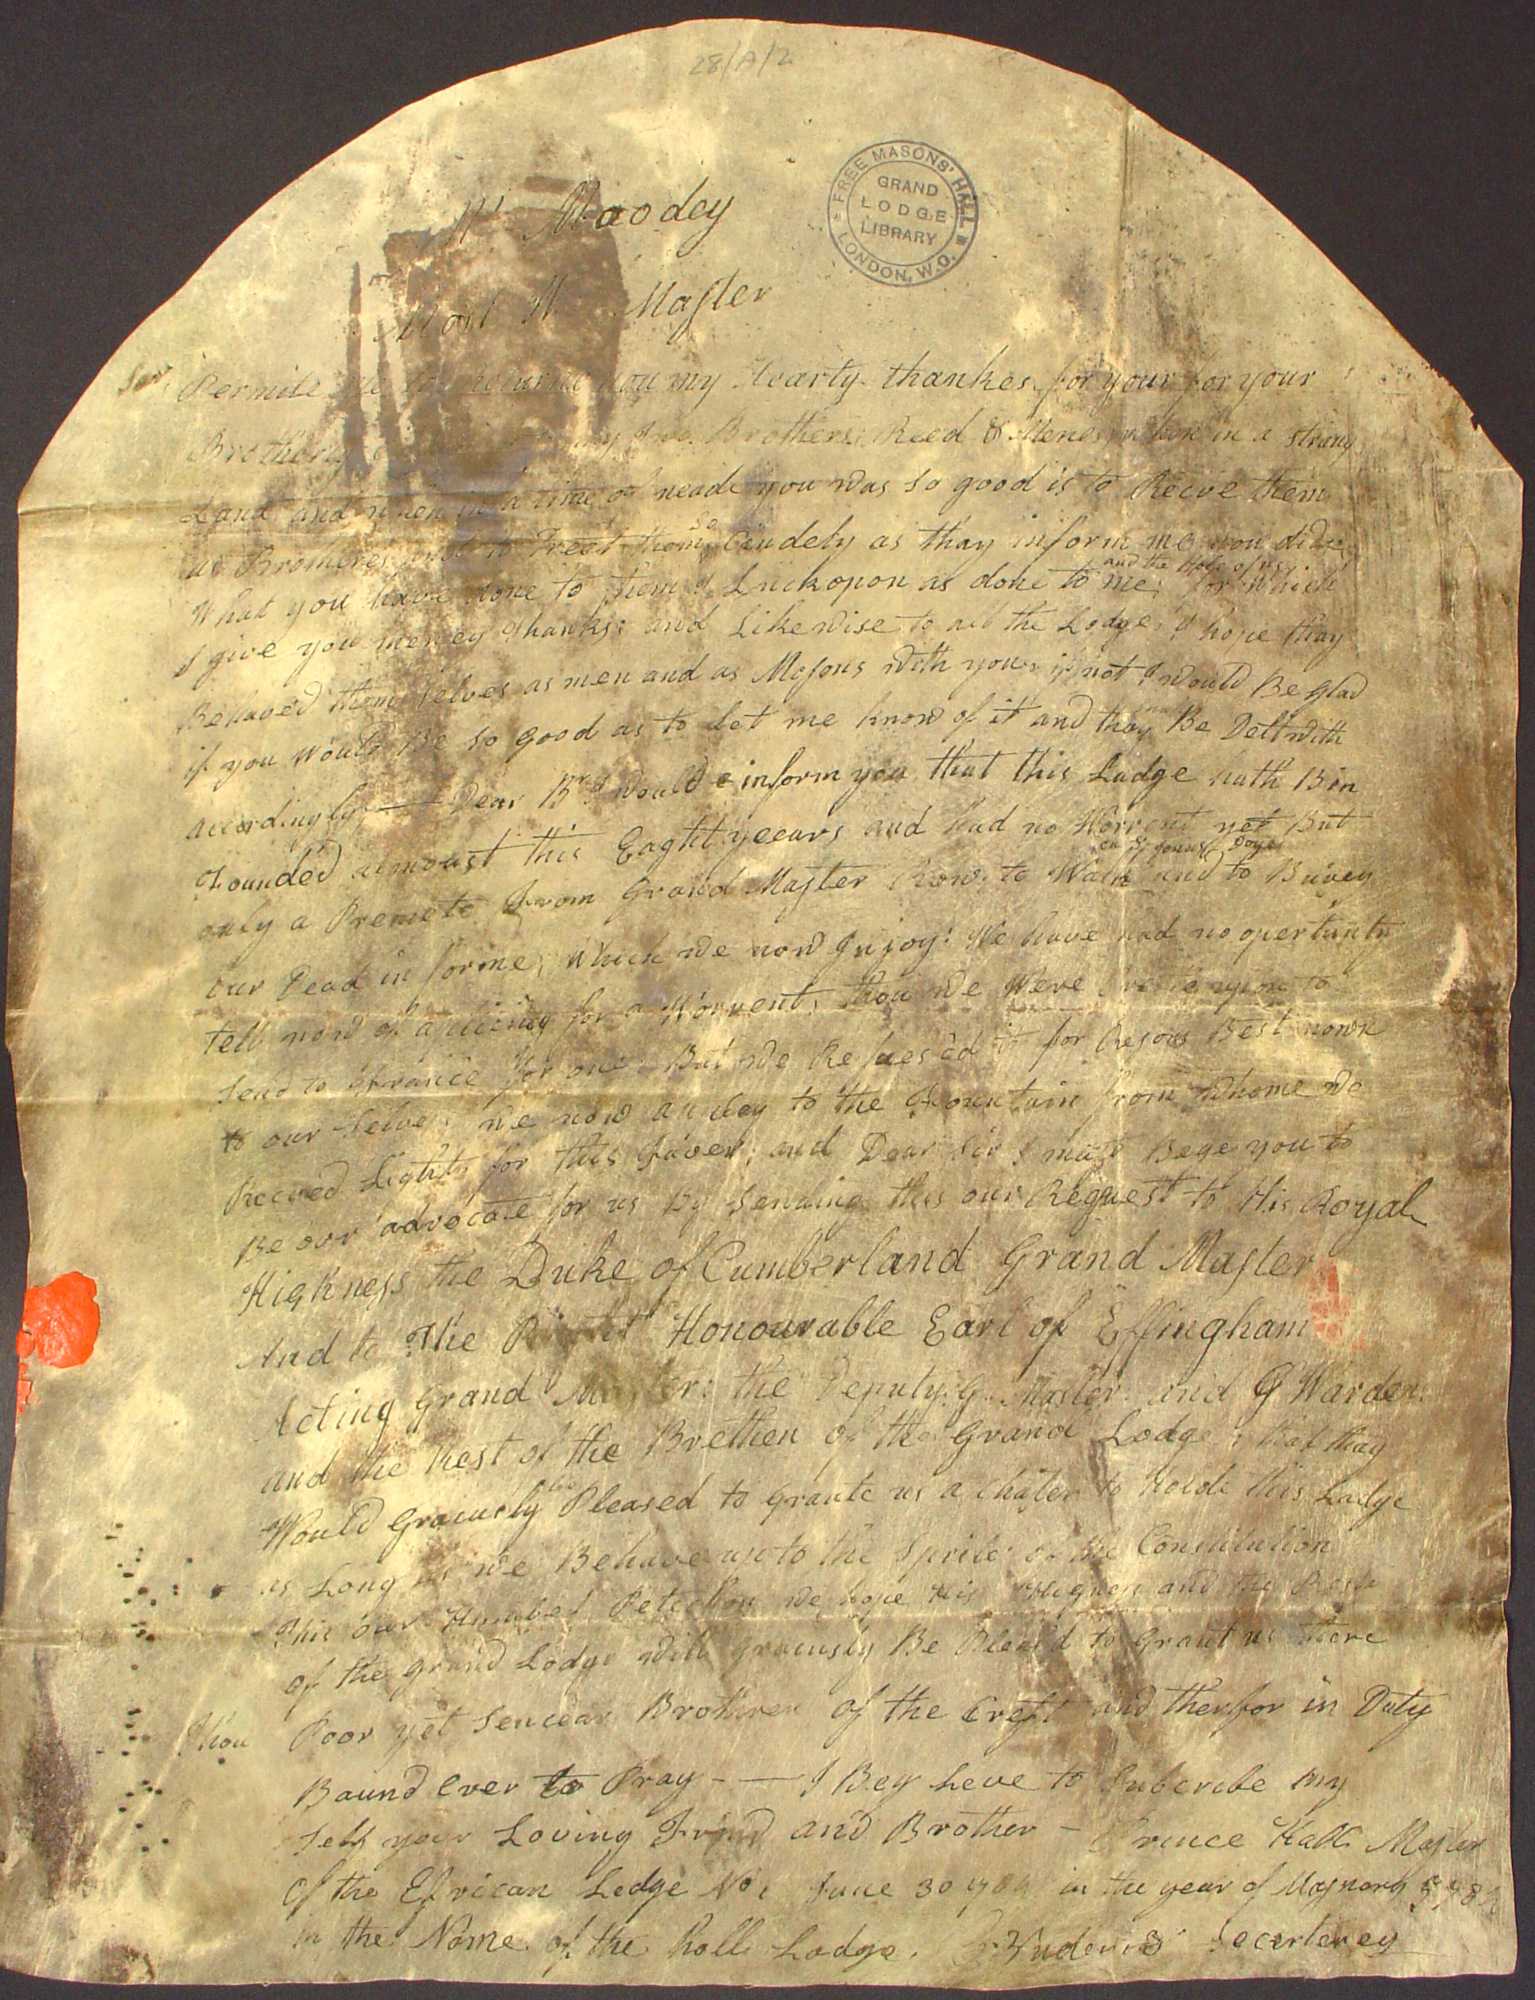 Image of Petition of Prince to W. Moodey, Brotherly Love Lodge